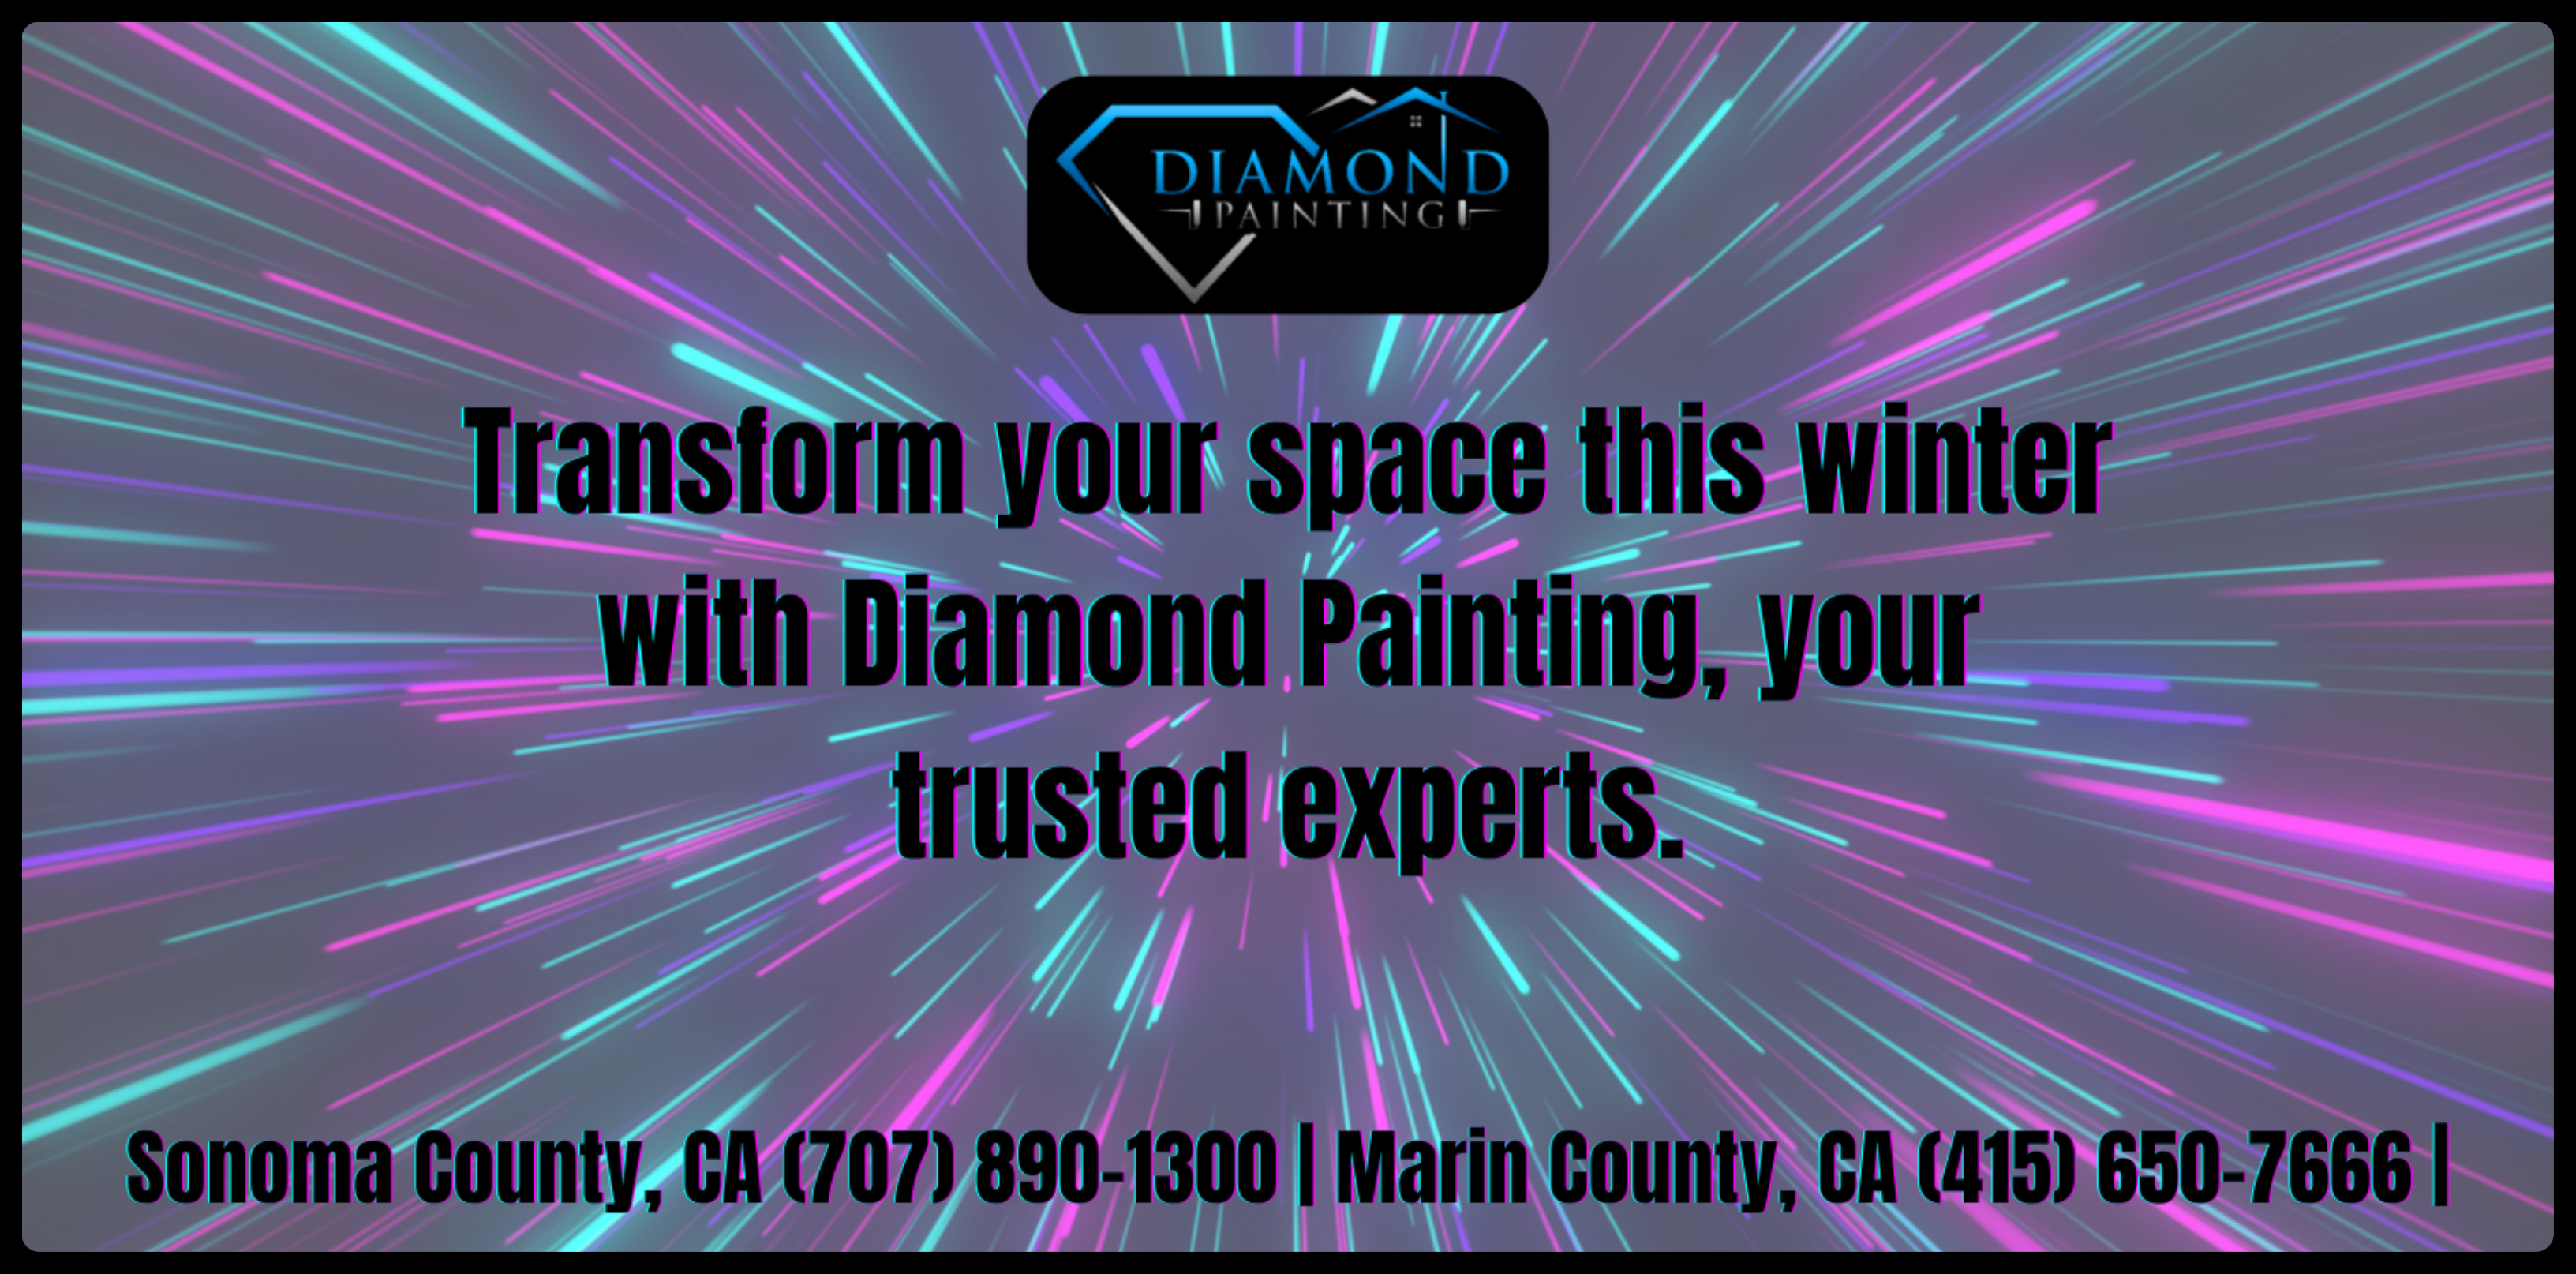 Painting Experts in Sonoma County CA